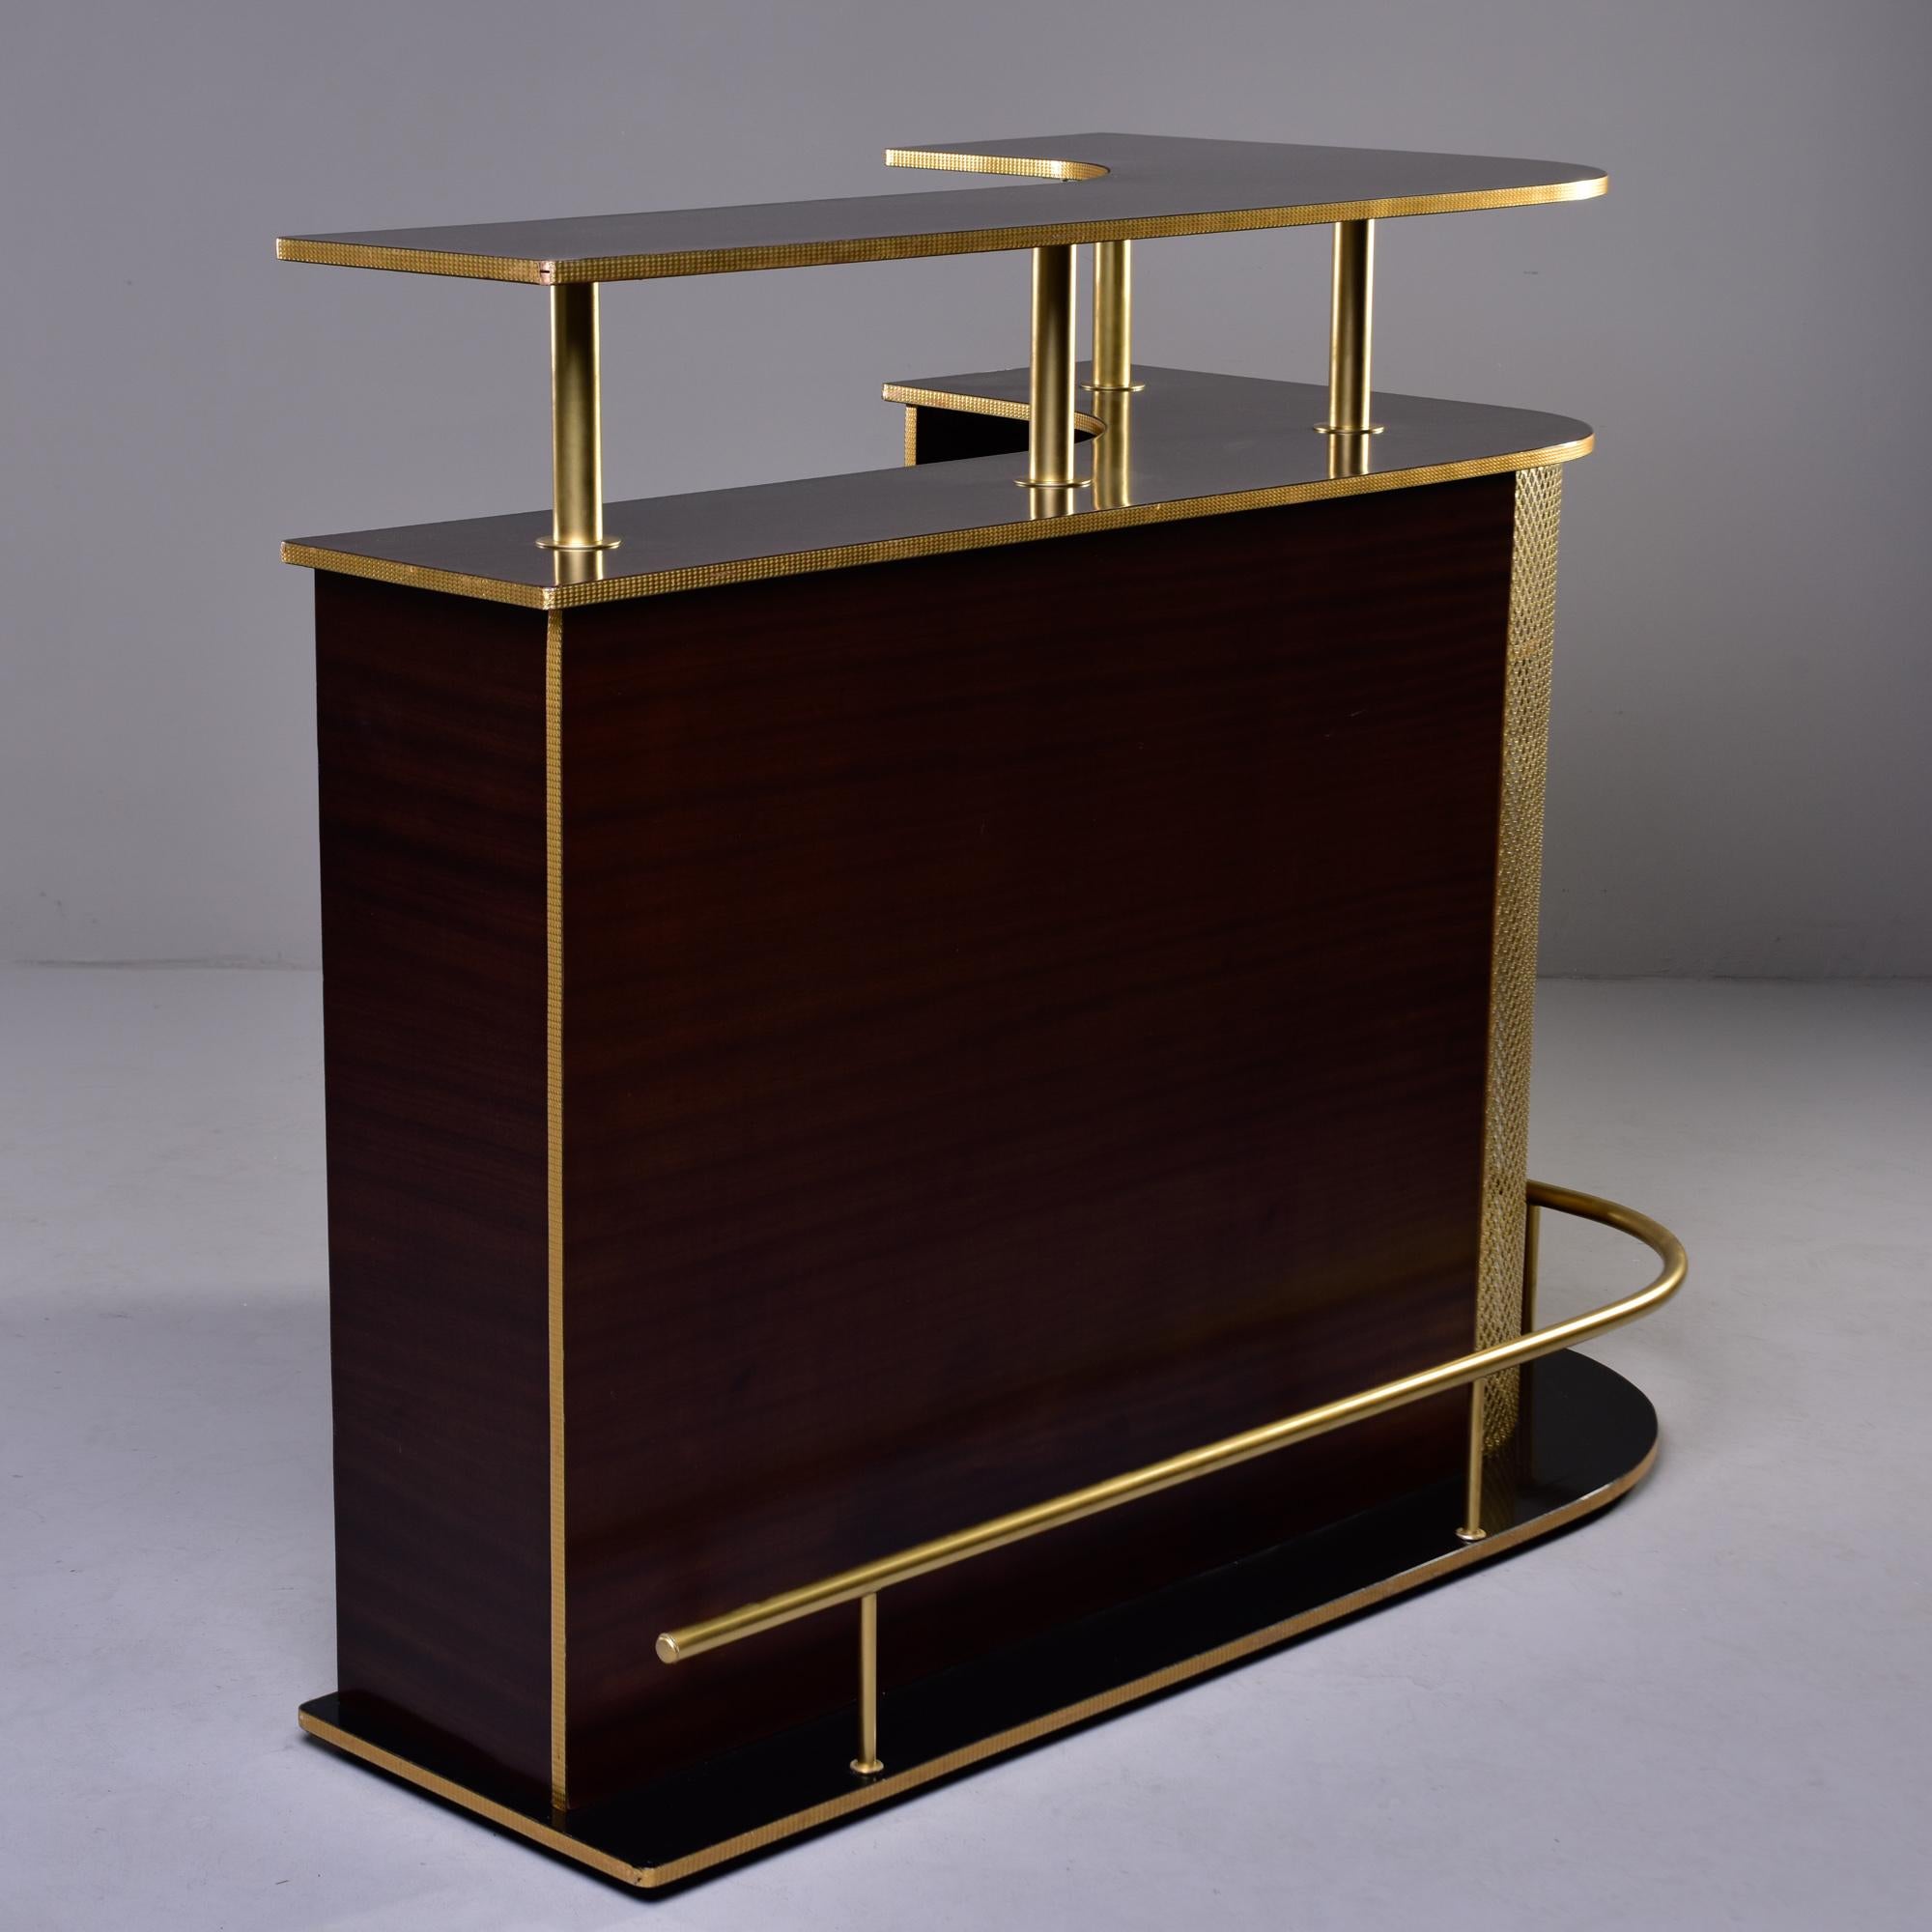 20th Century French Modernist Mahogany and Brass Bar